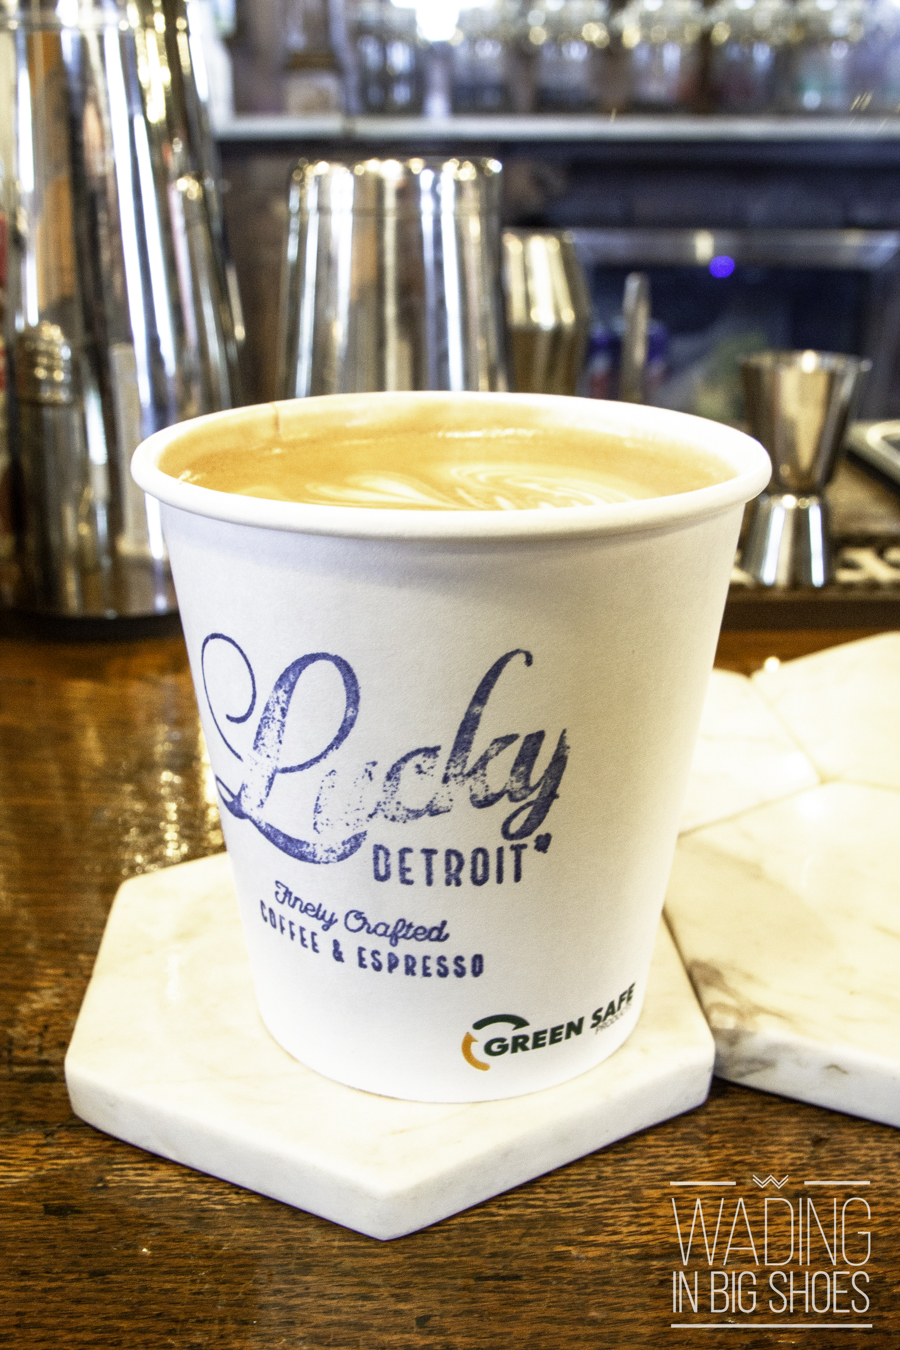 Detroit Coffee Shop Spotlight: Lucky Detroit (Wading in Big Shoes)